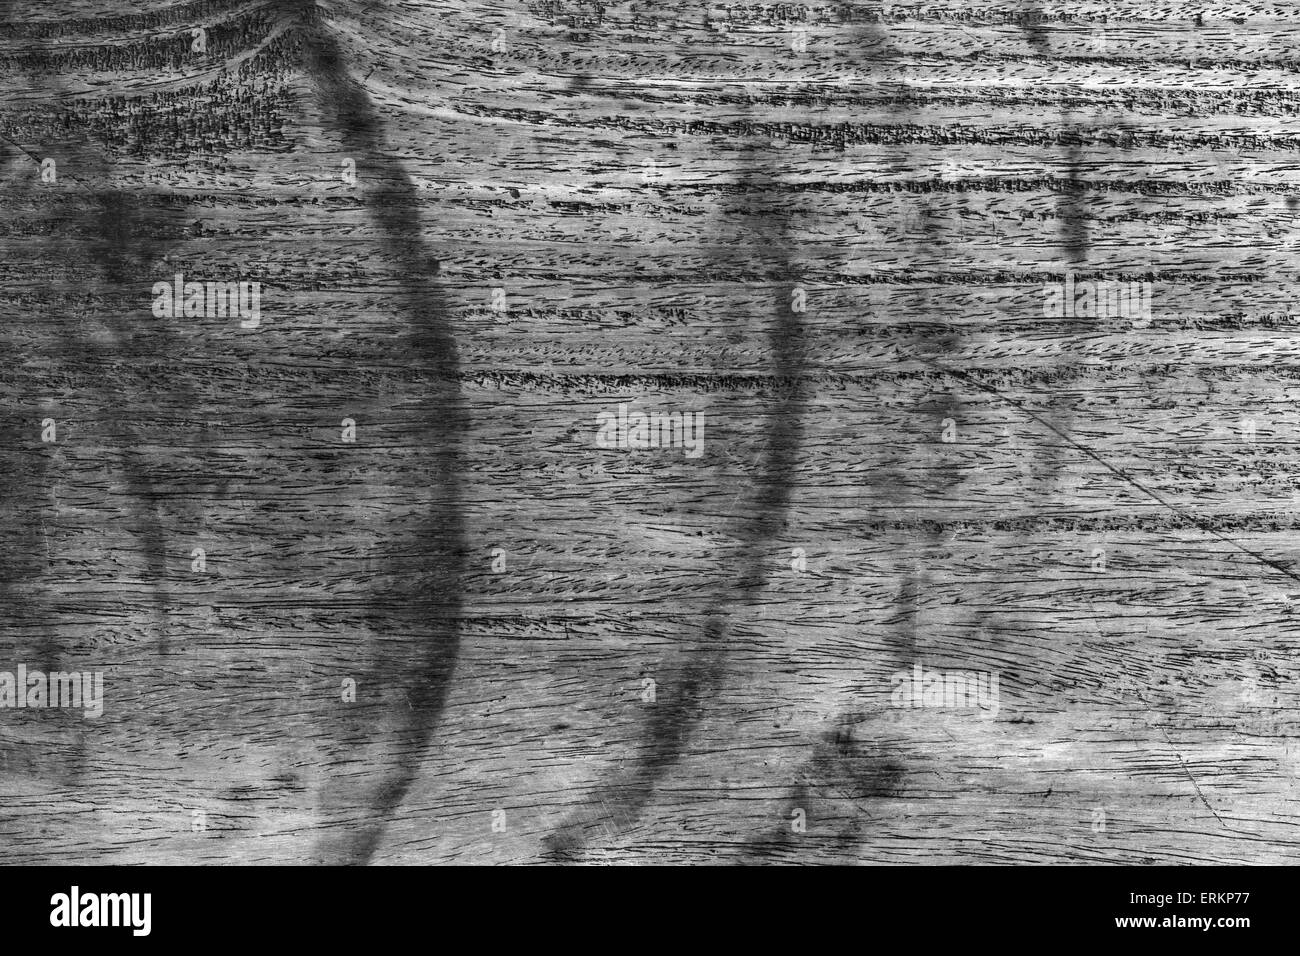 Wood texture background with light stain Stock Photo